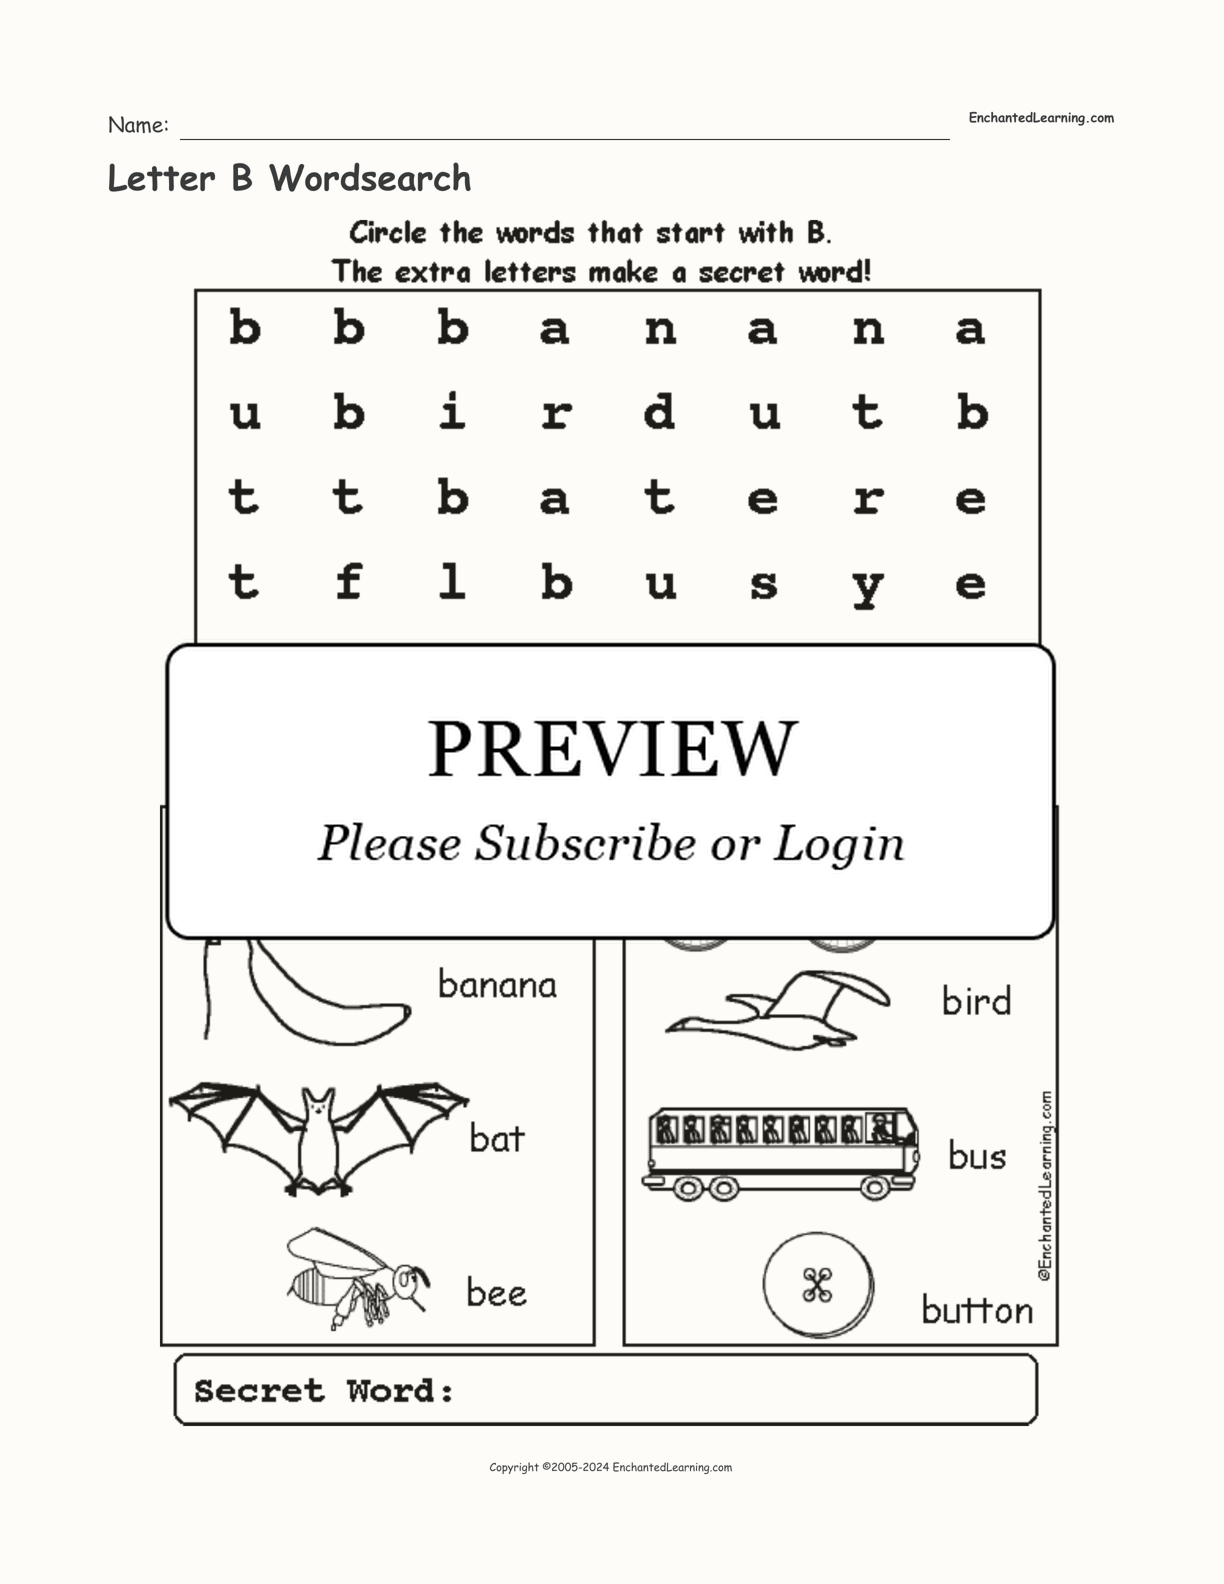 Letter B Wordsearch interactive worksheet page 1